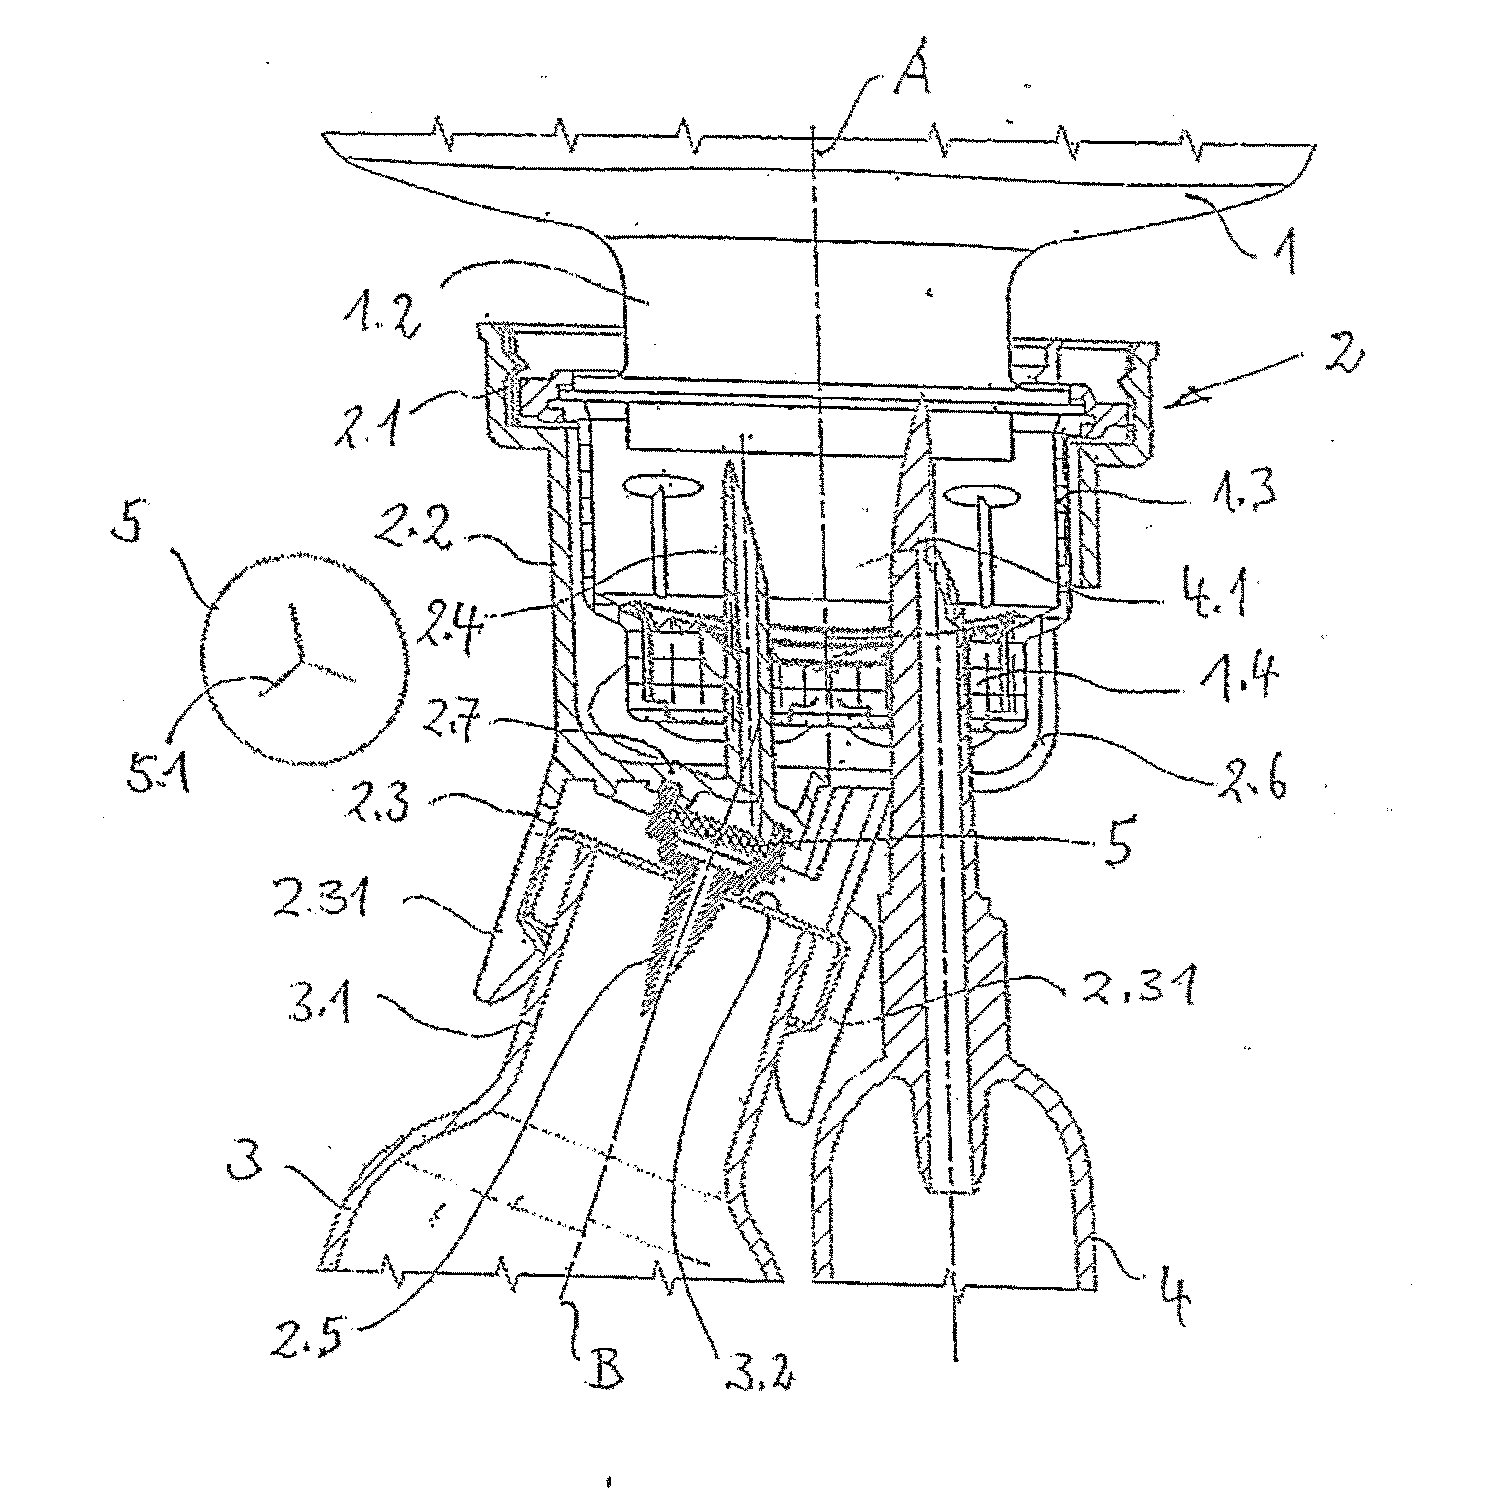 Device for introducing medicine into an infusion container